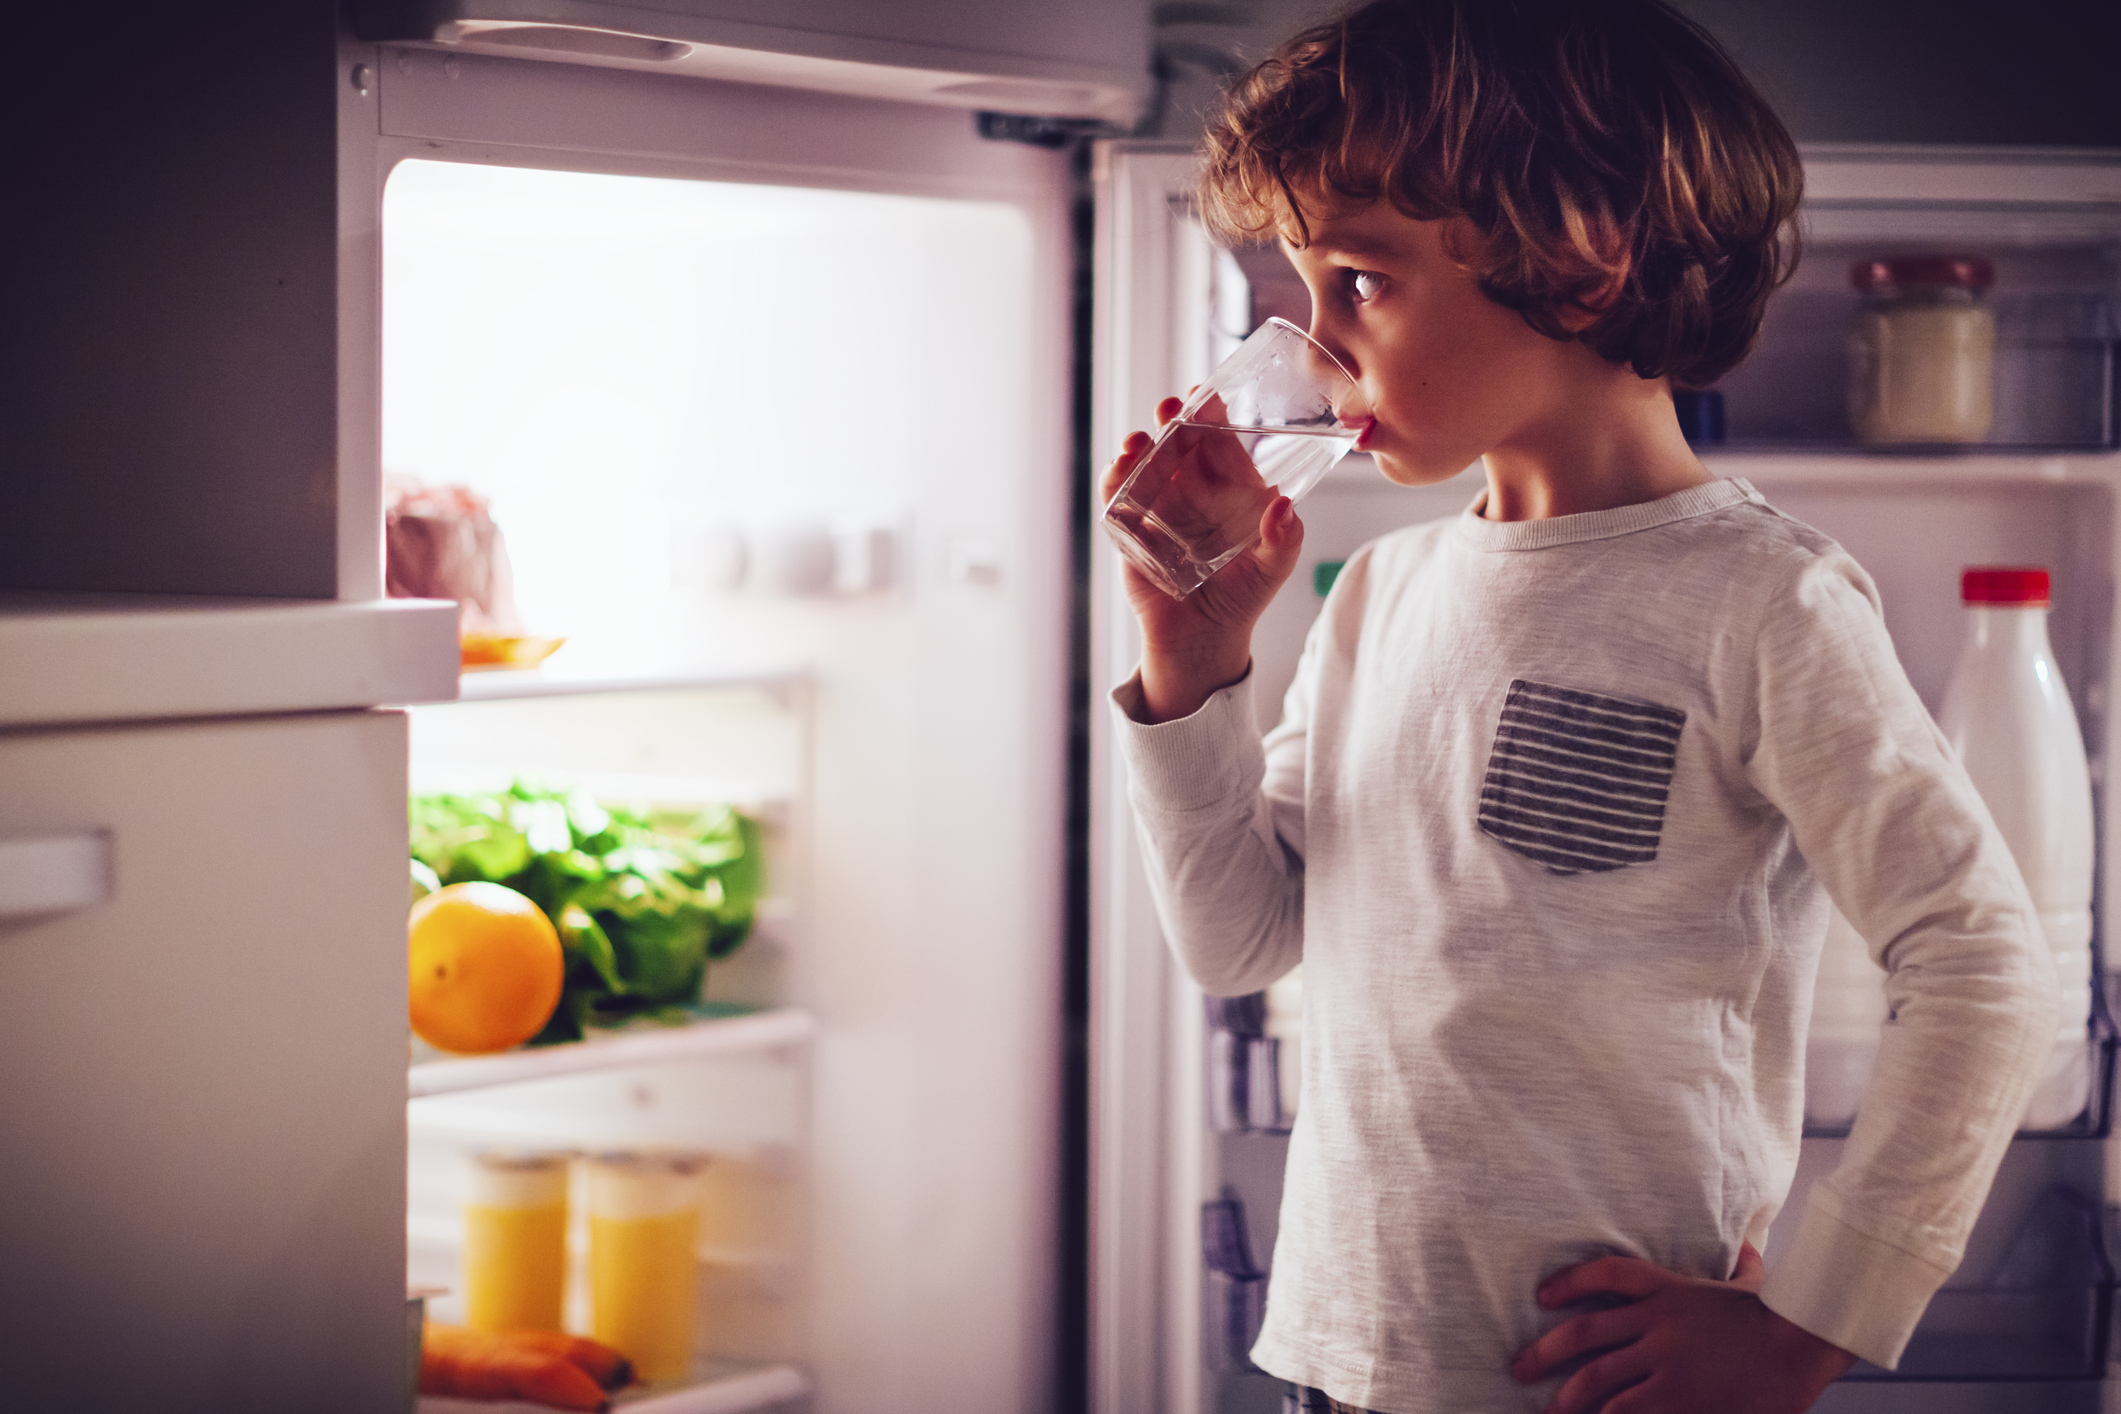 Young boy stands in front of refrigerator drinking glass of water 